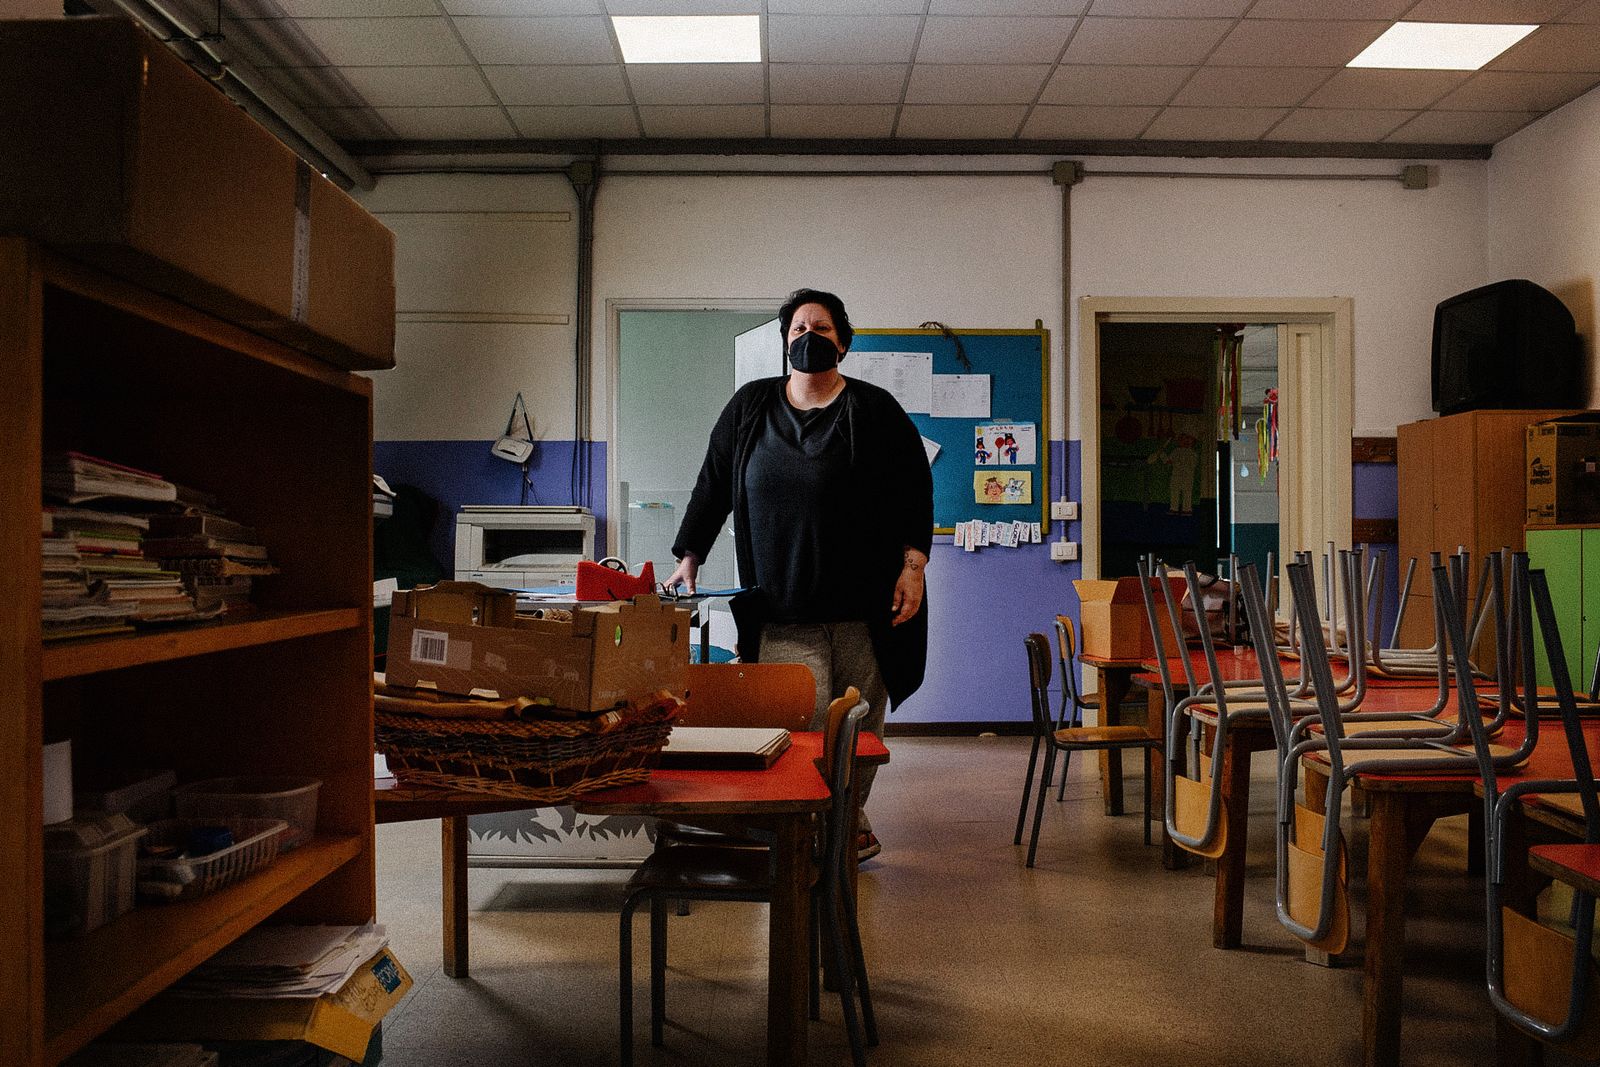 © Maurizio Gjivovich - Image from the Italian school on lockdown photography project